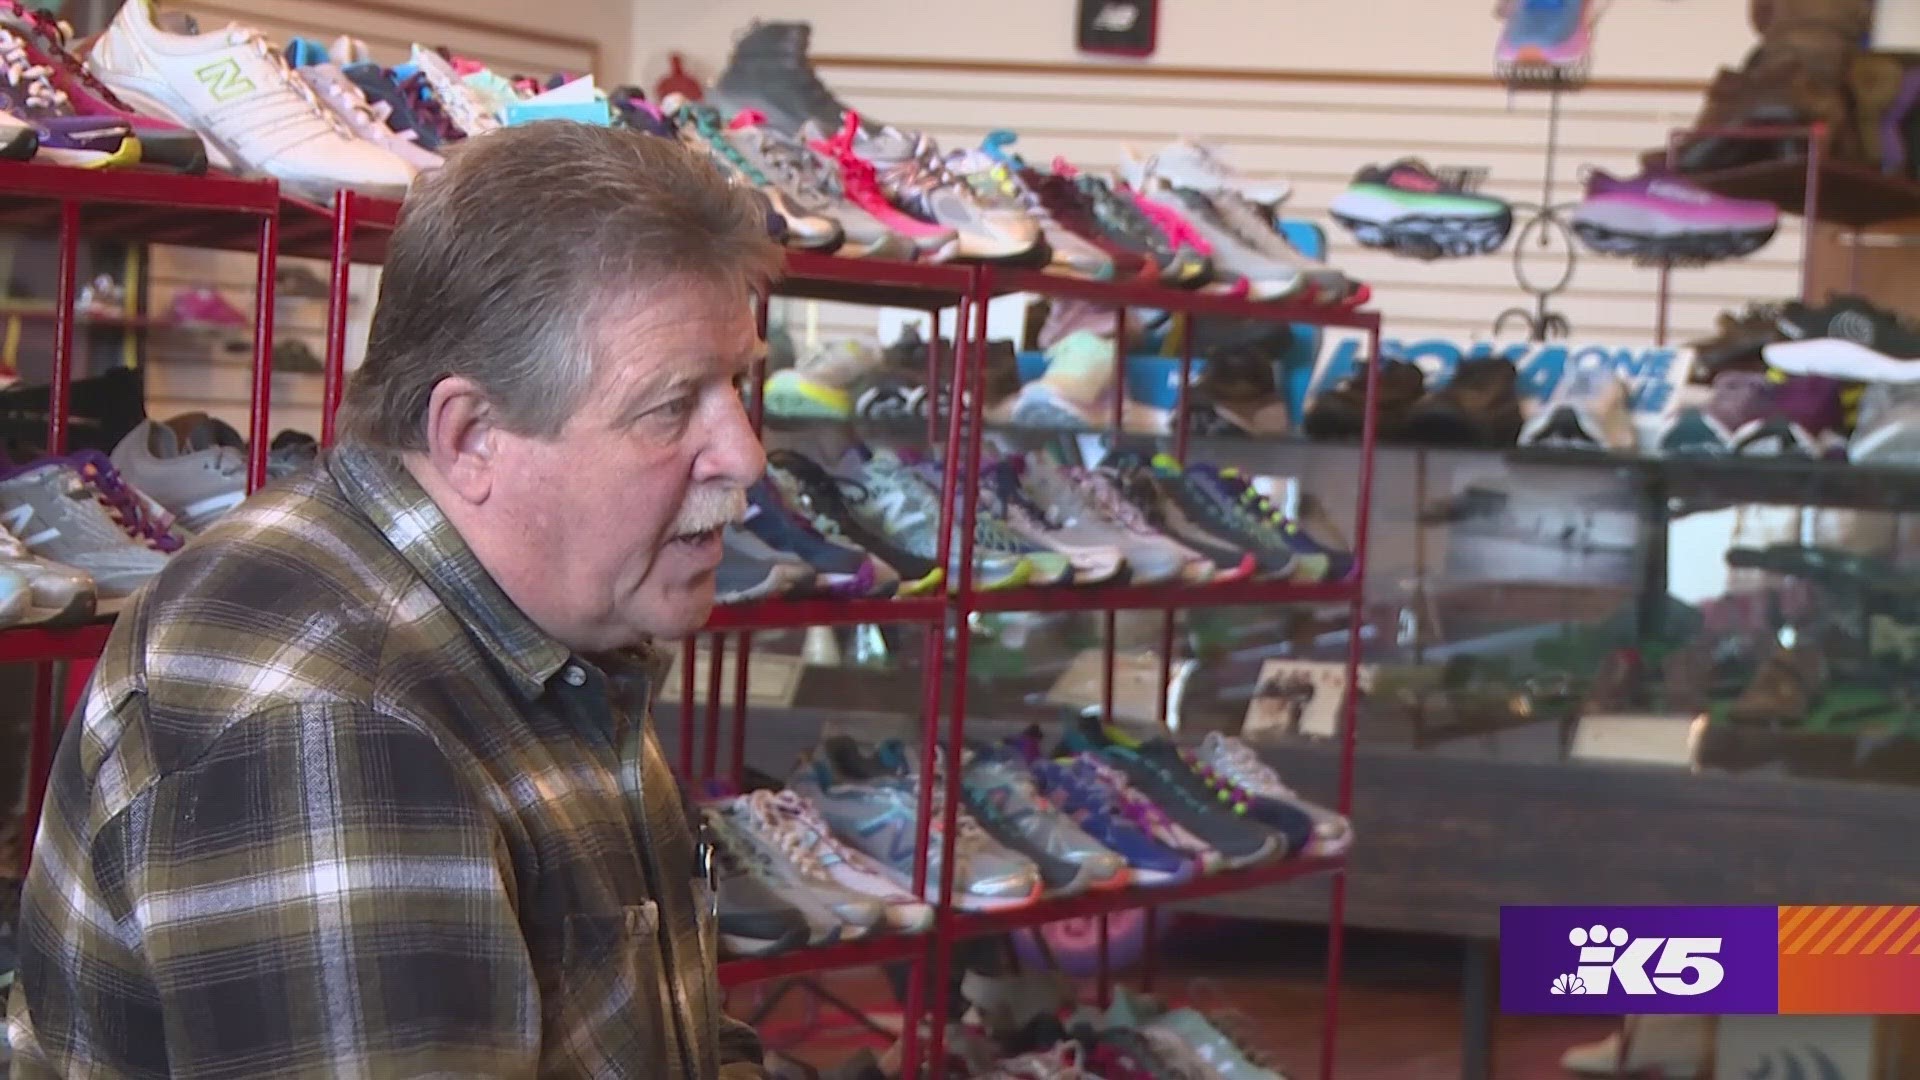 Vintage murals, a former brothel and a proper fit are a few of the things you'll find at Family Shoe Store. #k5evening